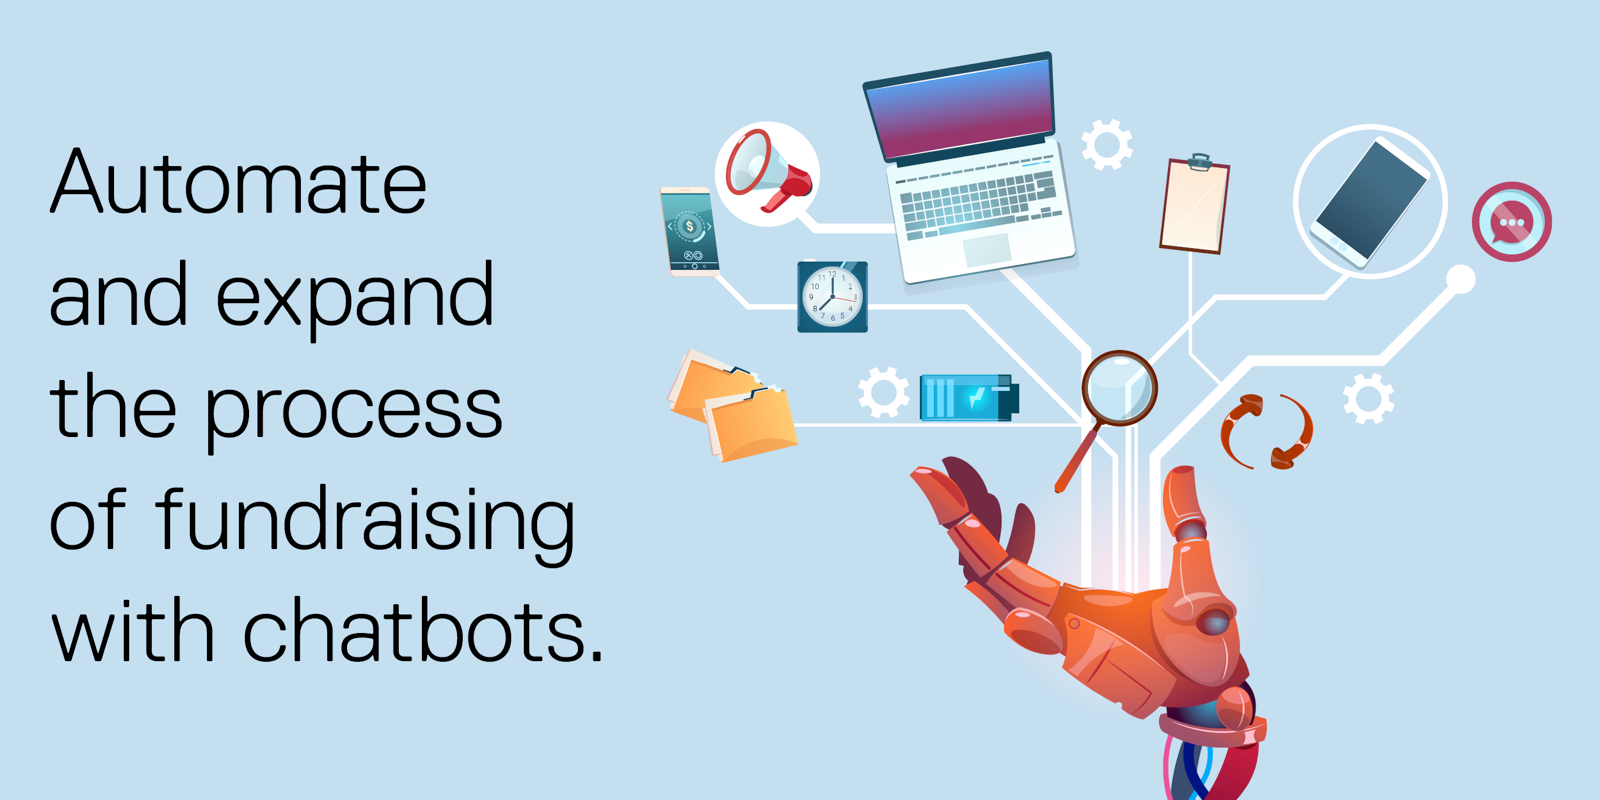 Automate and expand the process of fundraising with chatbots.